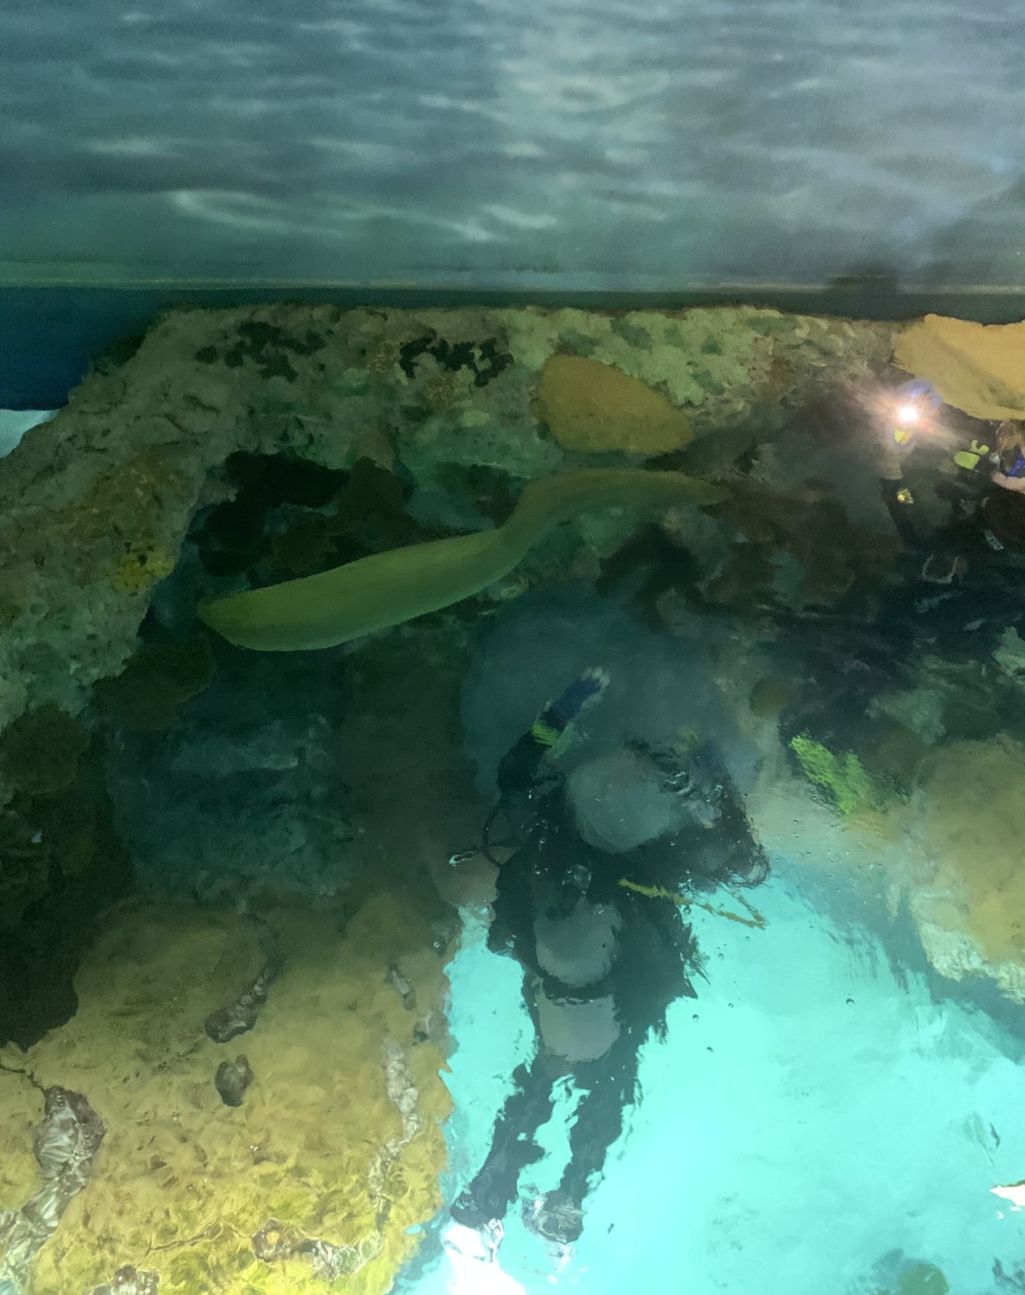 Routine Dive Inspections at the Blacktip Reef Exhibit